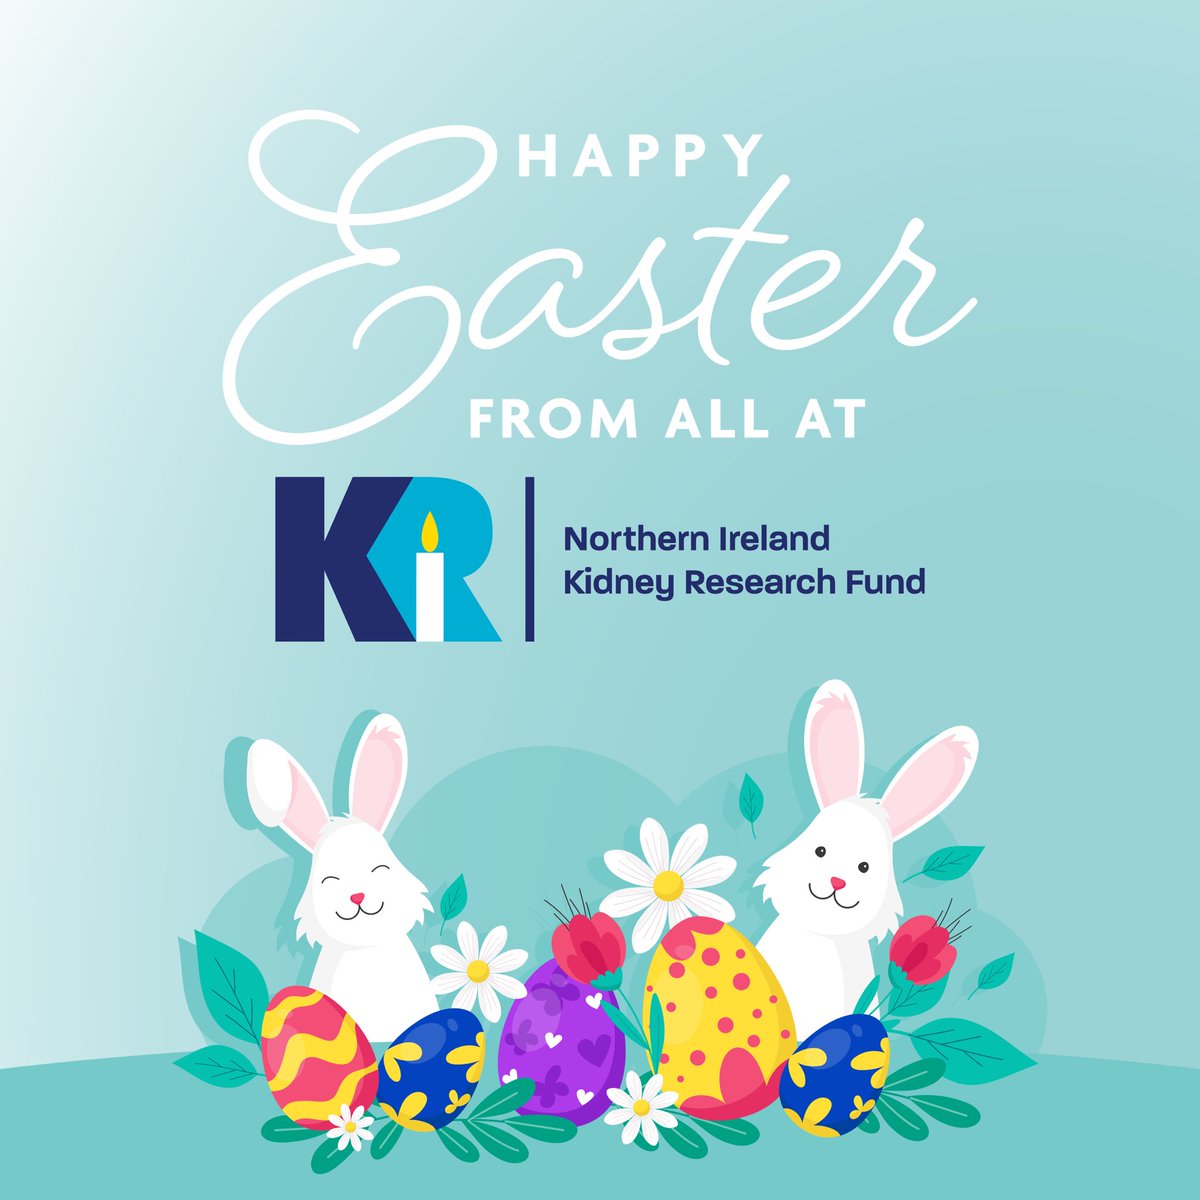 Wishing everyone a very Happy Easter from all at Nothern Ireland Kidney Research Fund 💙🐰💛